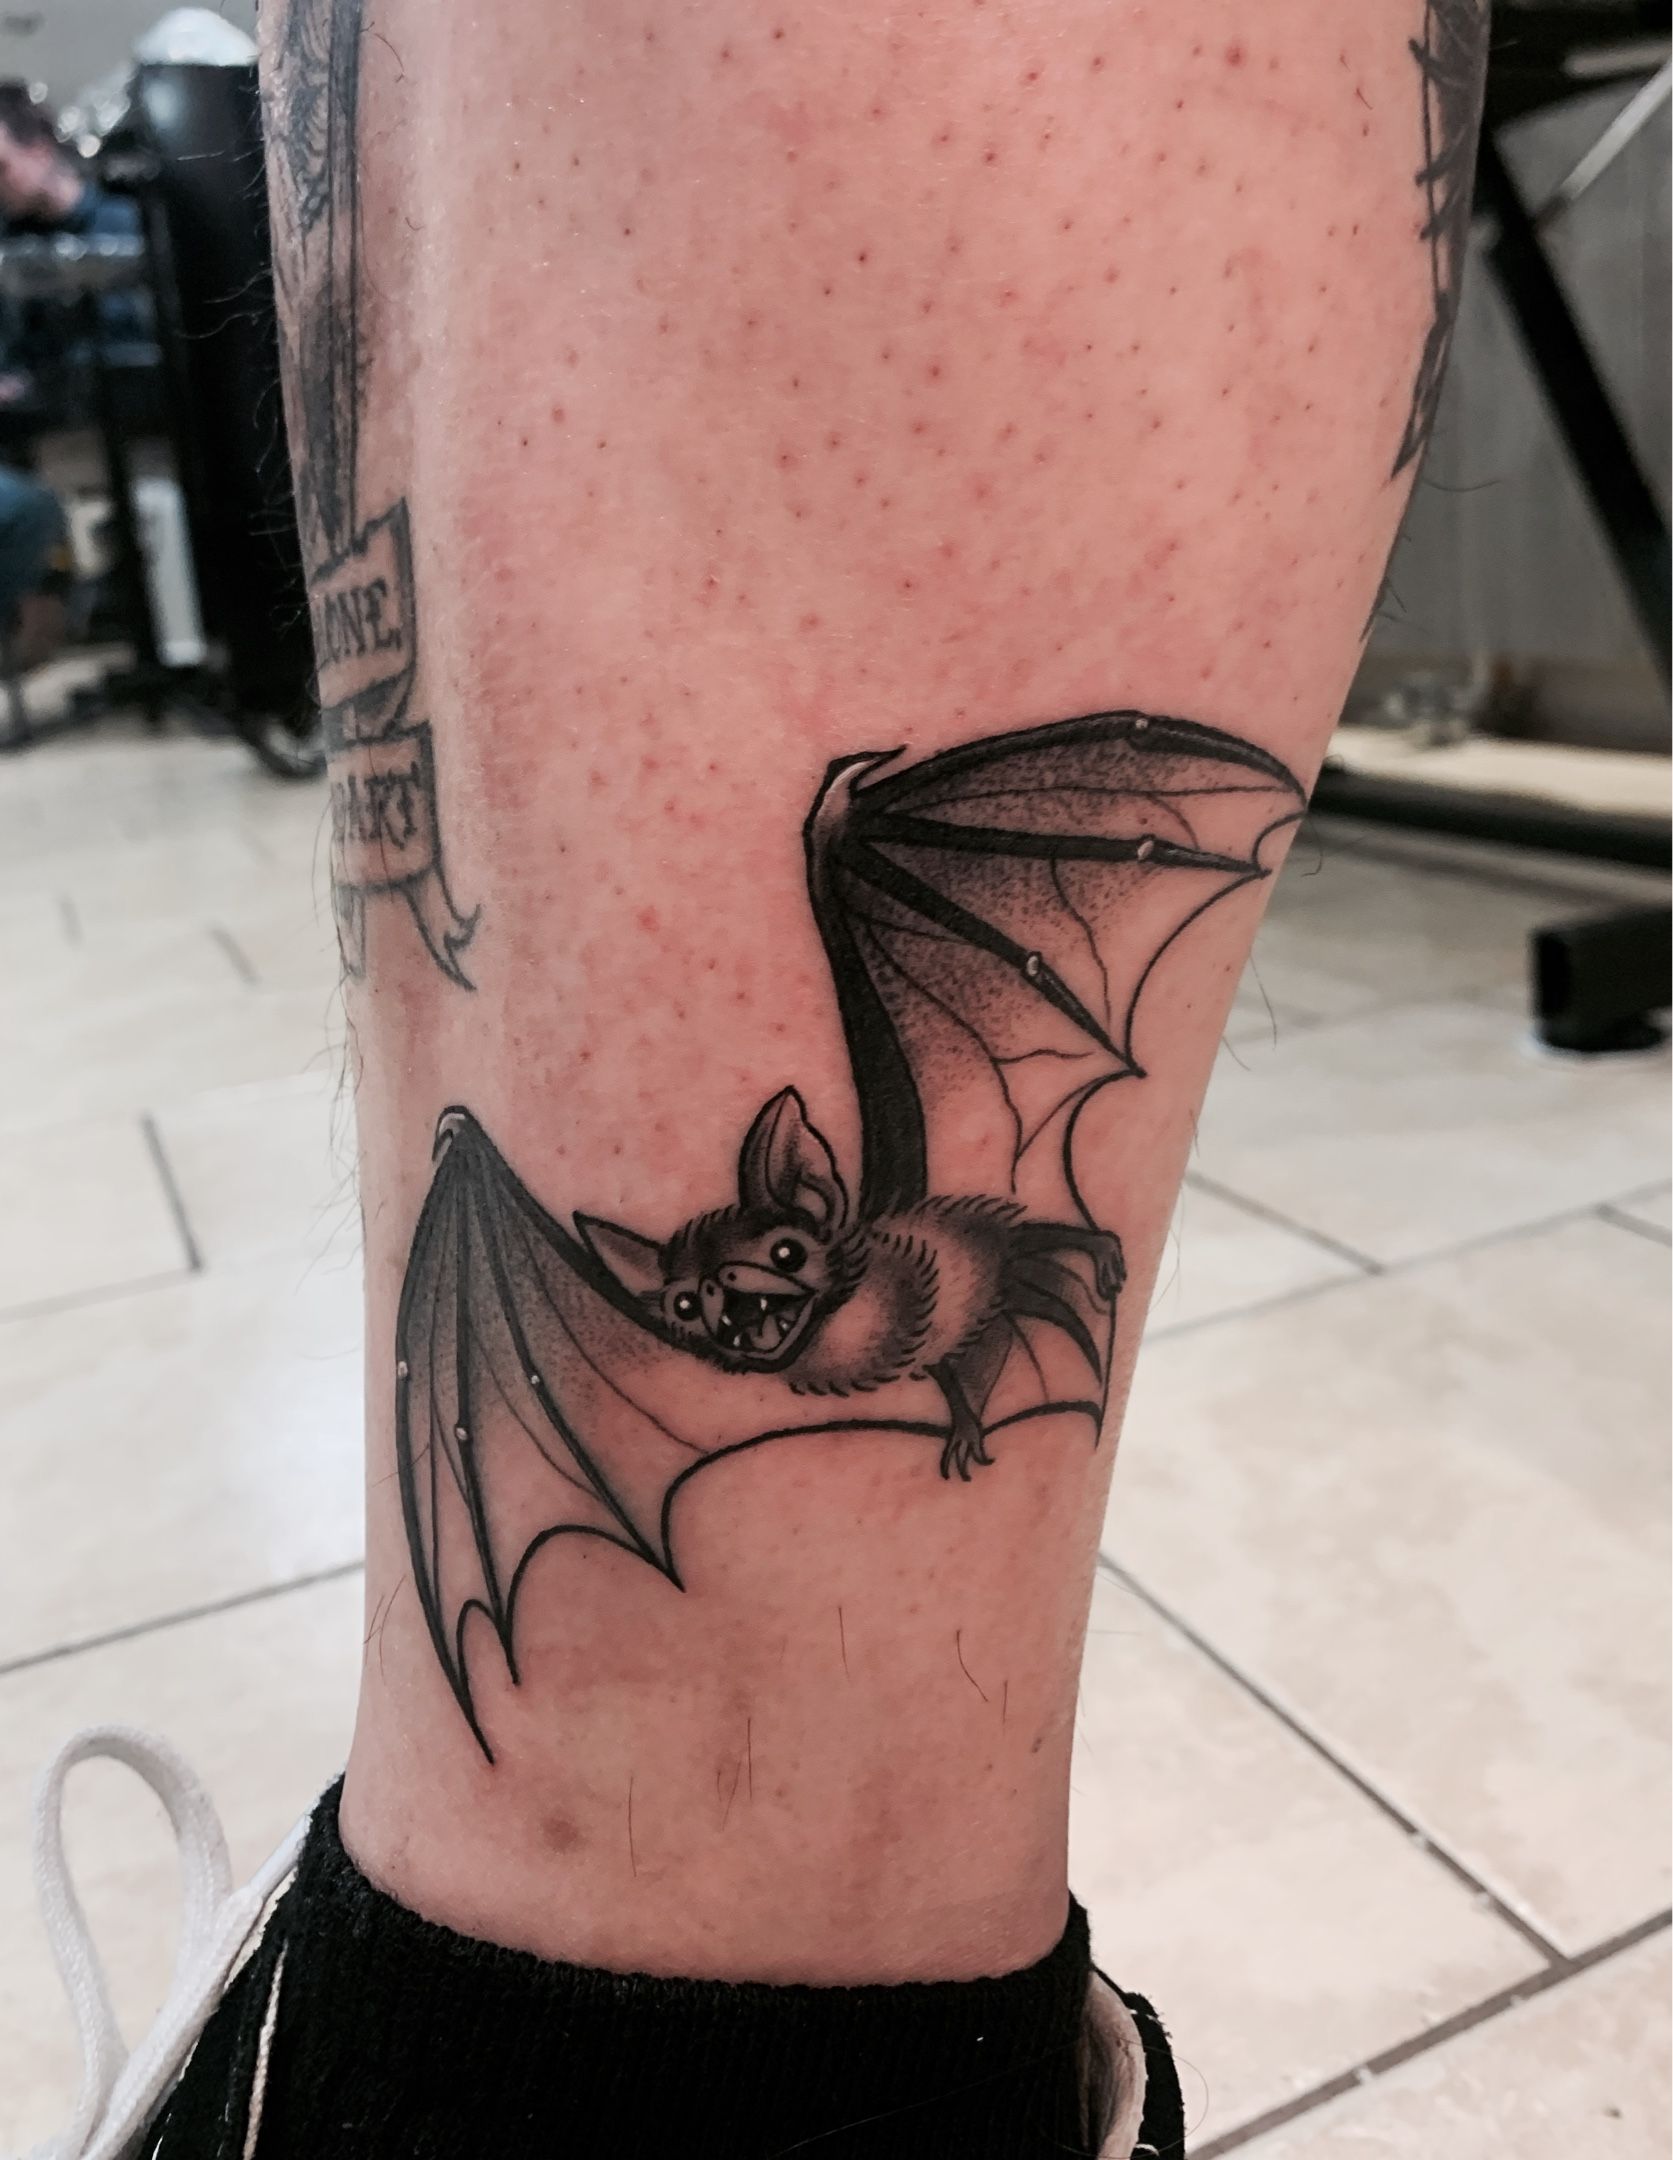 A person's hand with a bat tattoo on it photo – Bat Image on Unsplash